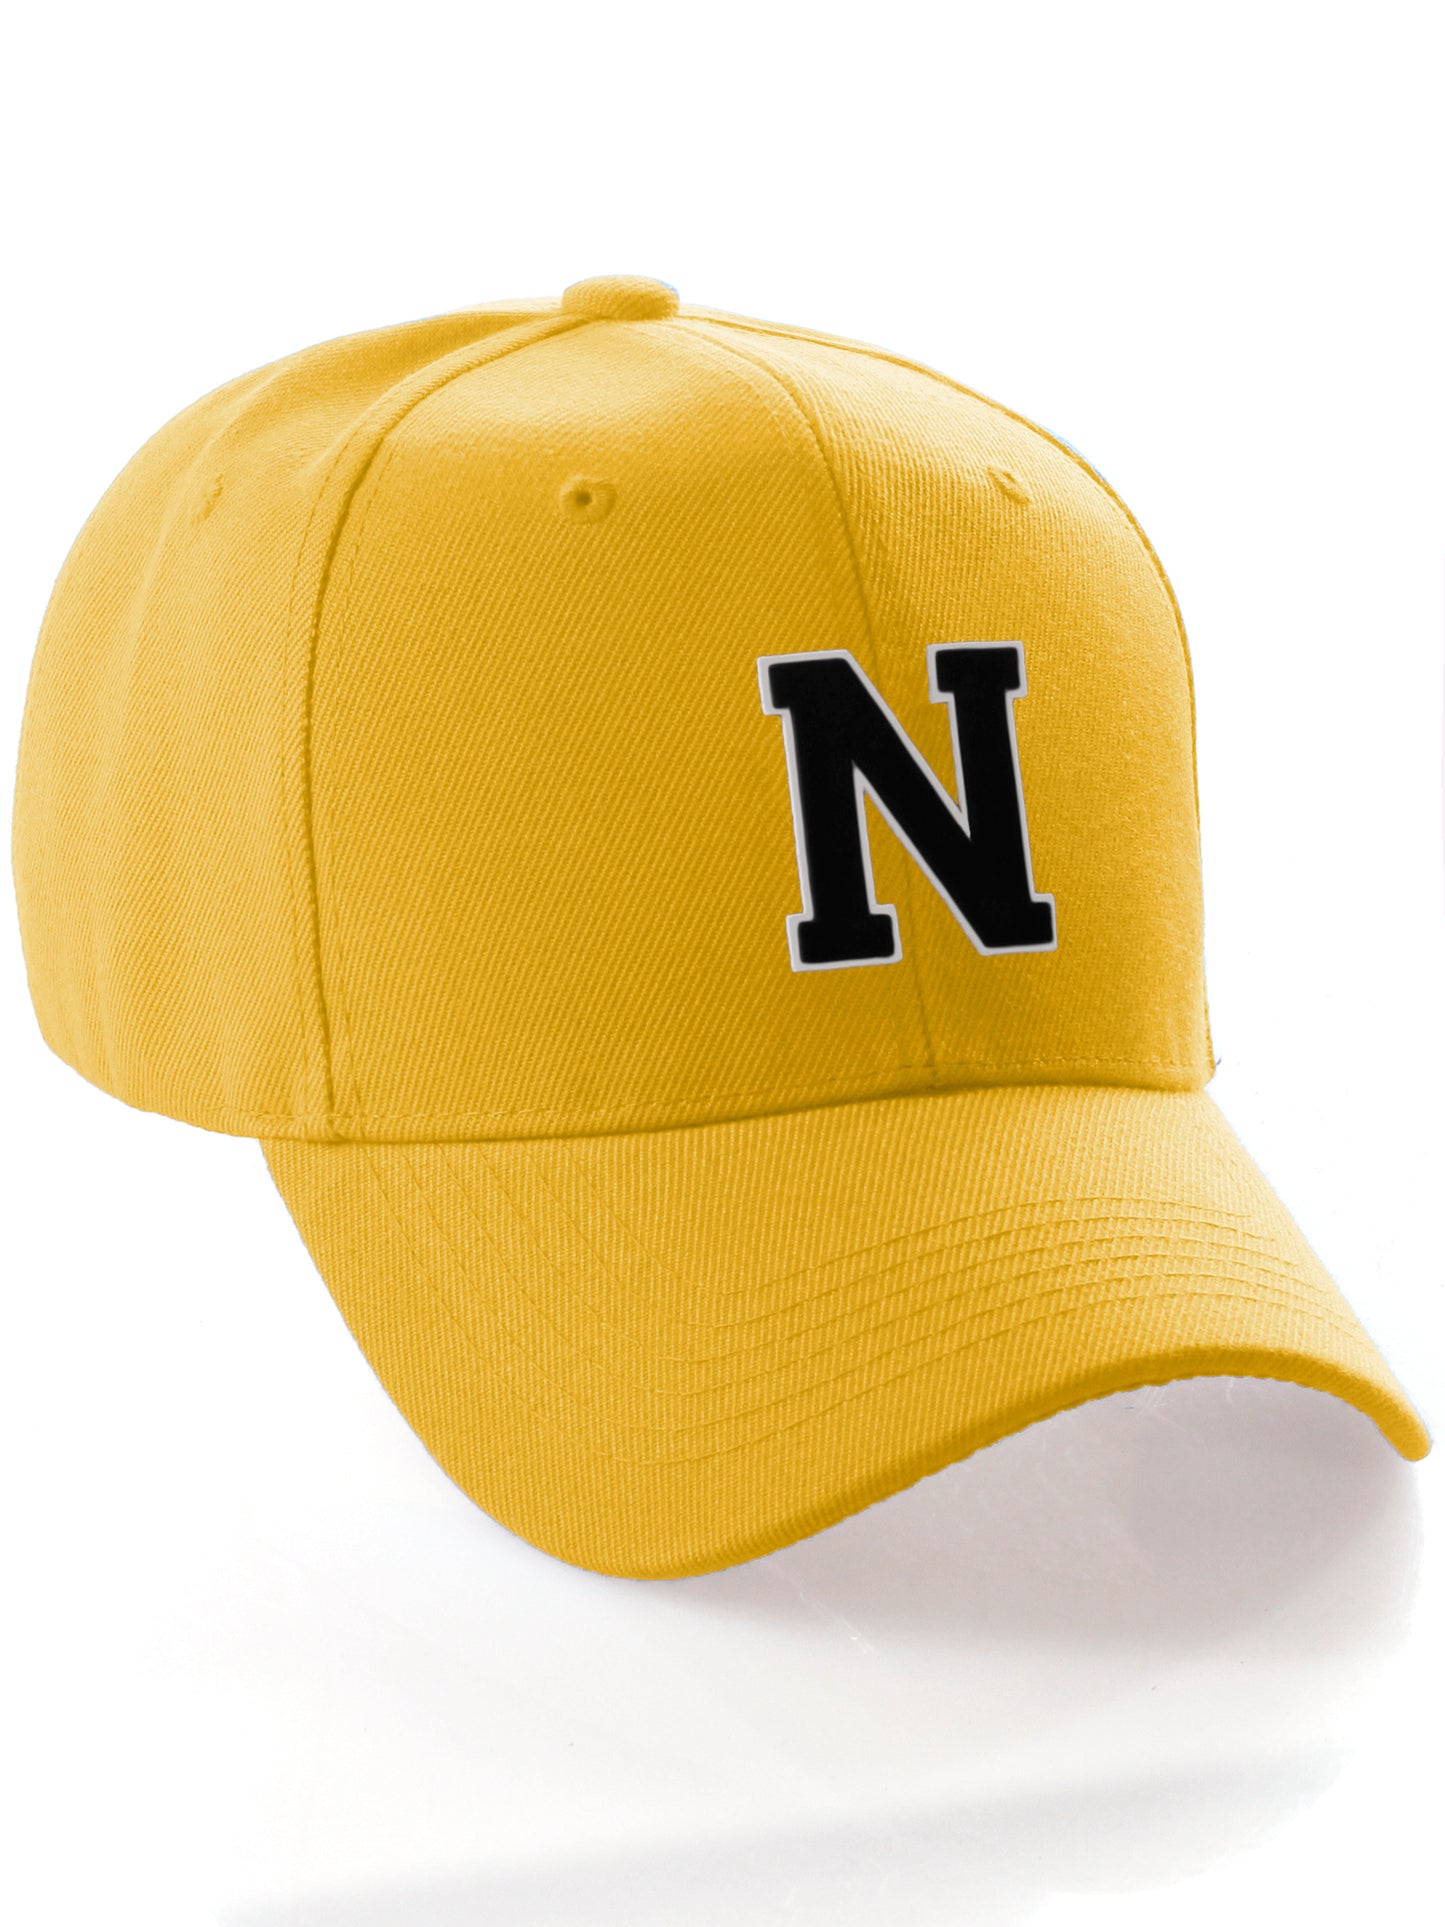 Classic Baseball Hat Custom A to Z Initial Team Letter, Yellow Cap White Black